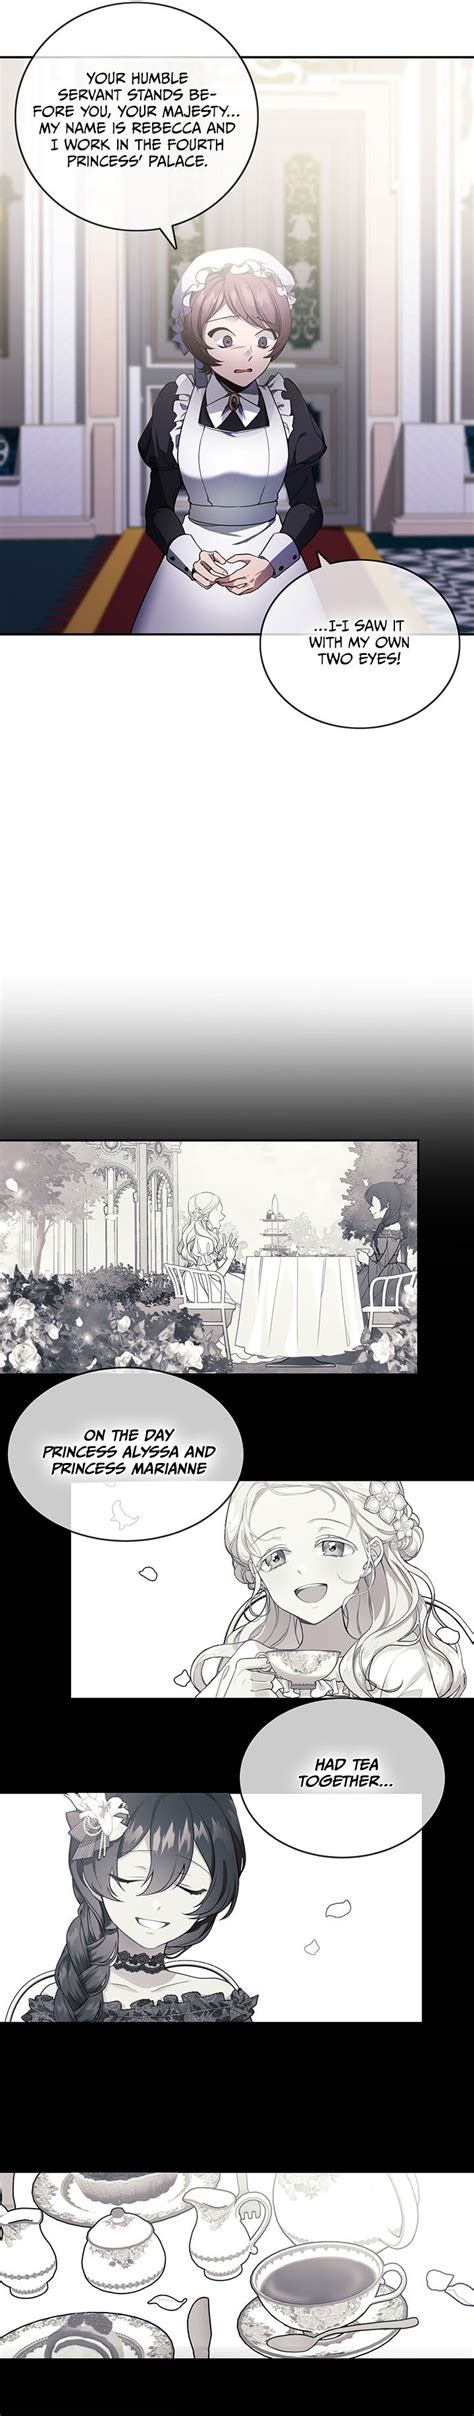 Into the light once again - Chapter 2 - Mixed Manga